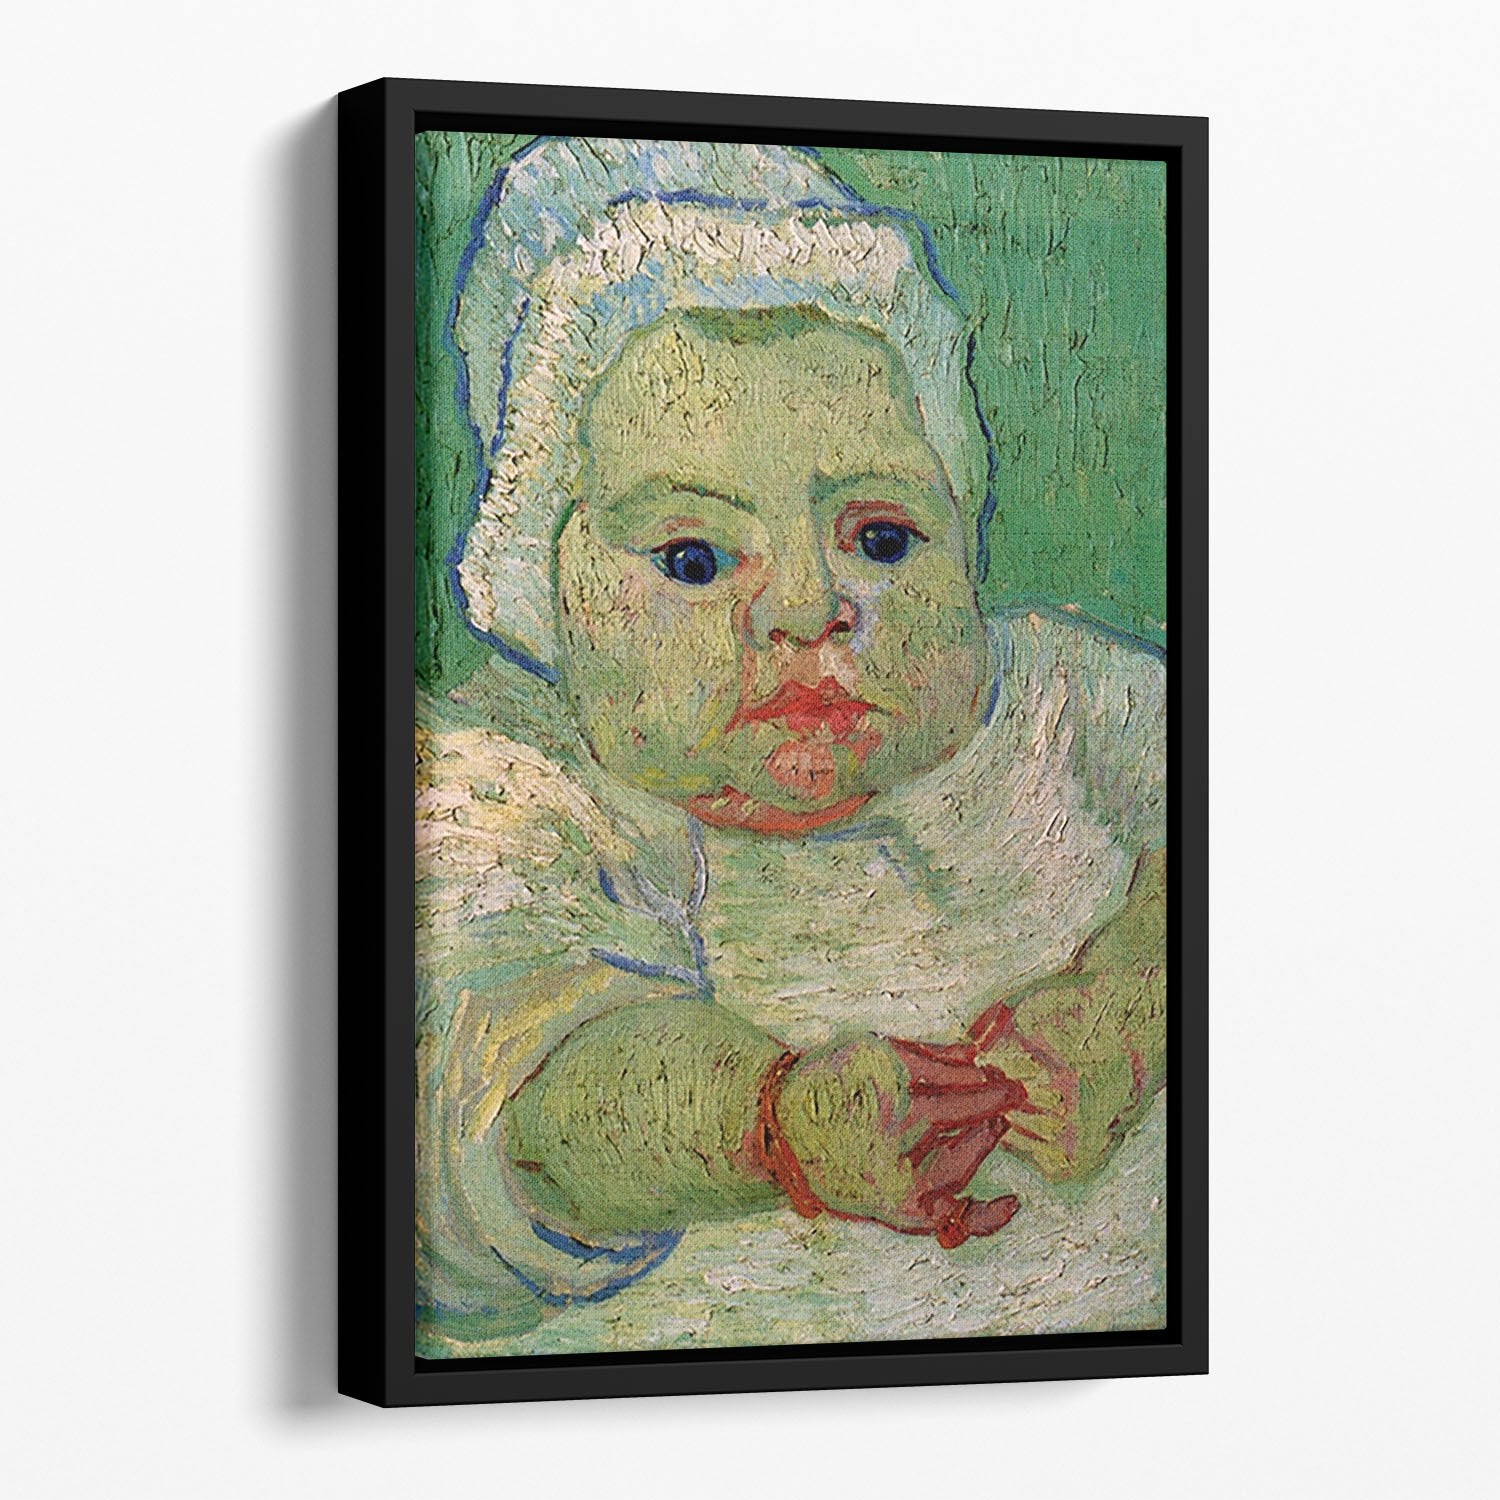 The Baby Marcelle Roulin by Van Gogh Floating Framed Canvas